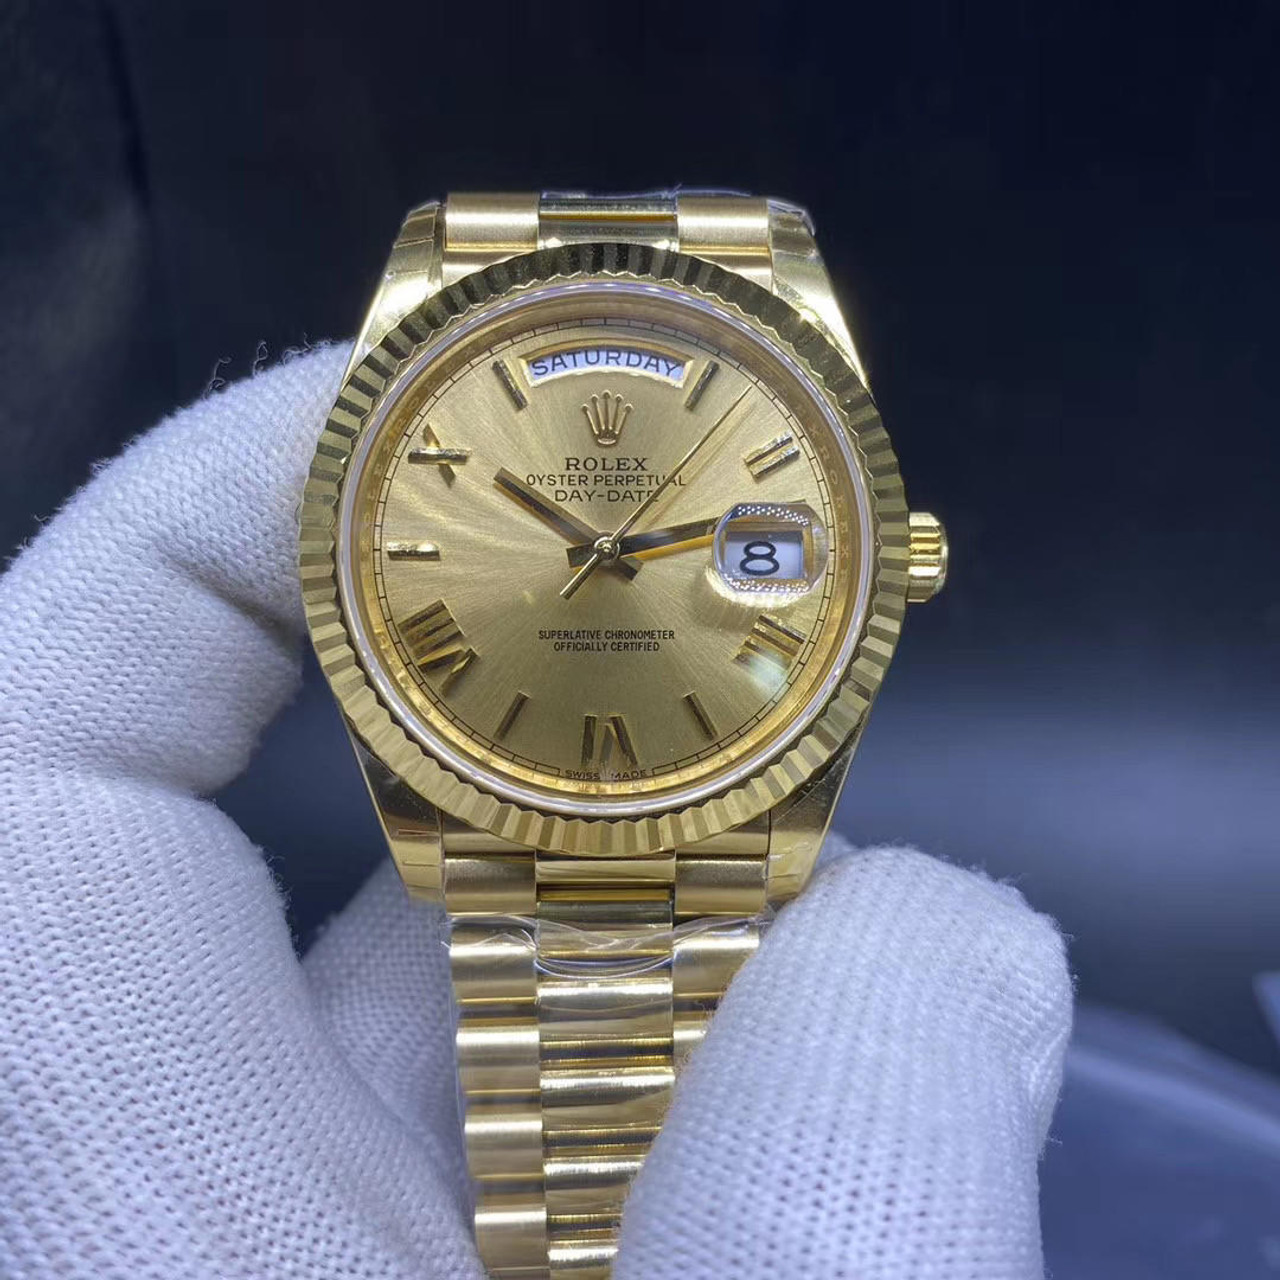 buy High quality replica plain Jane Rolex day date watch from ...